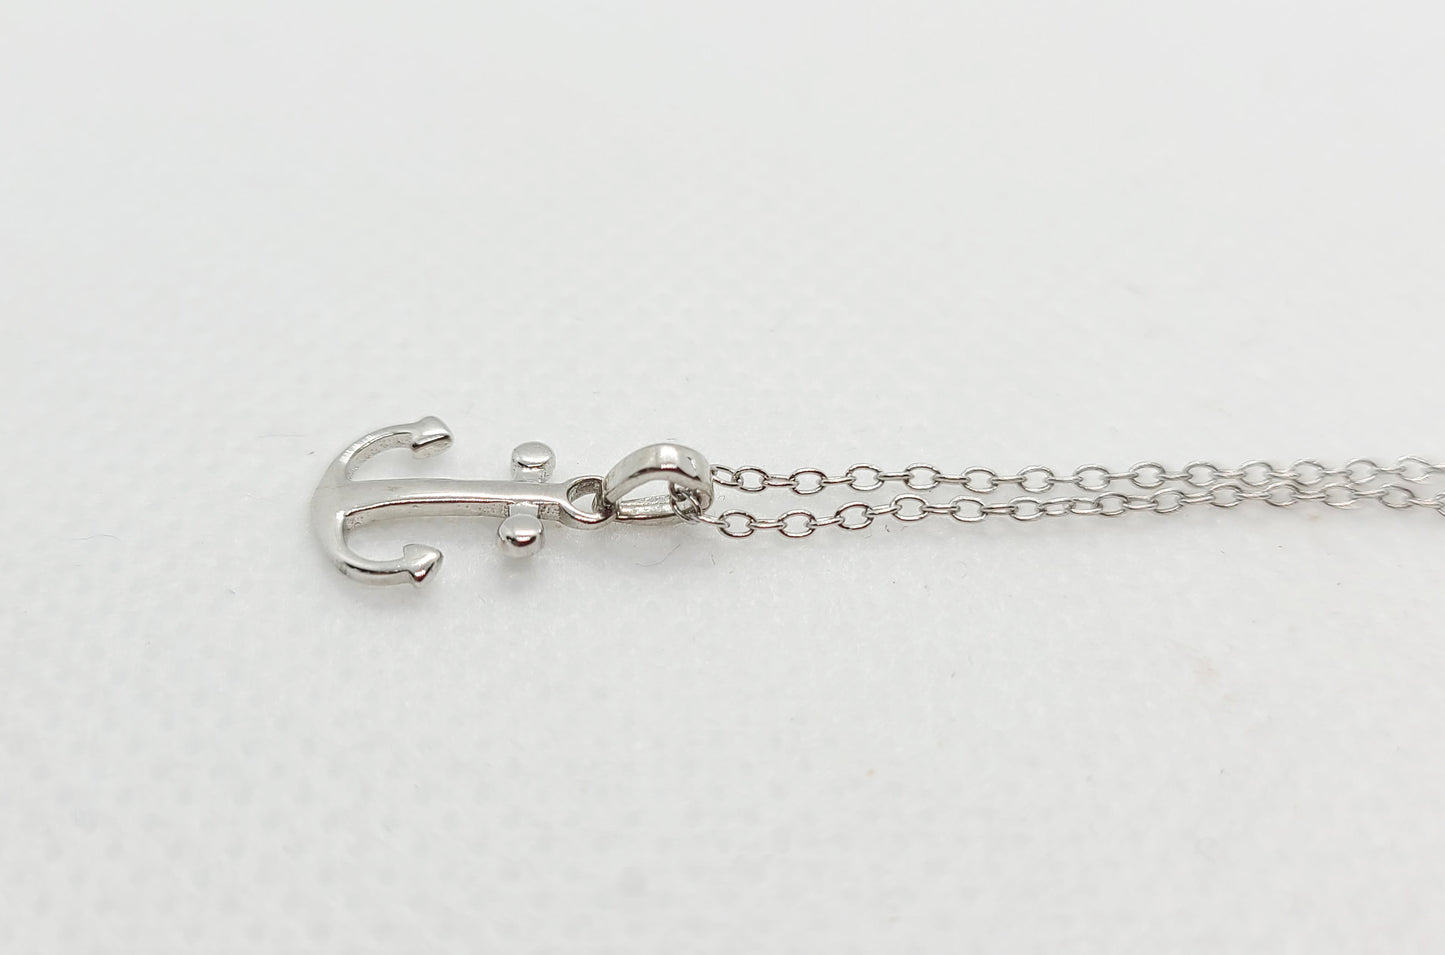 Petite Anchor Necklace, Sterling Silver